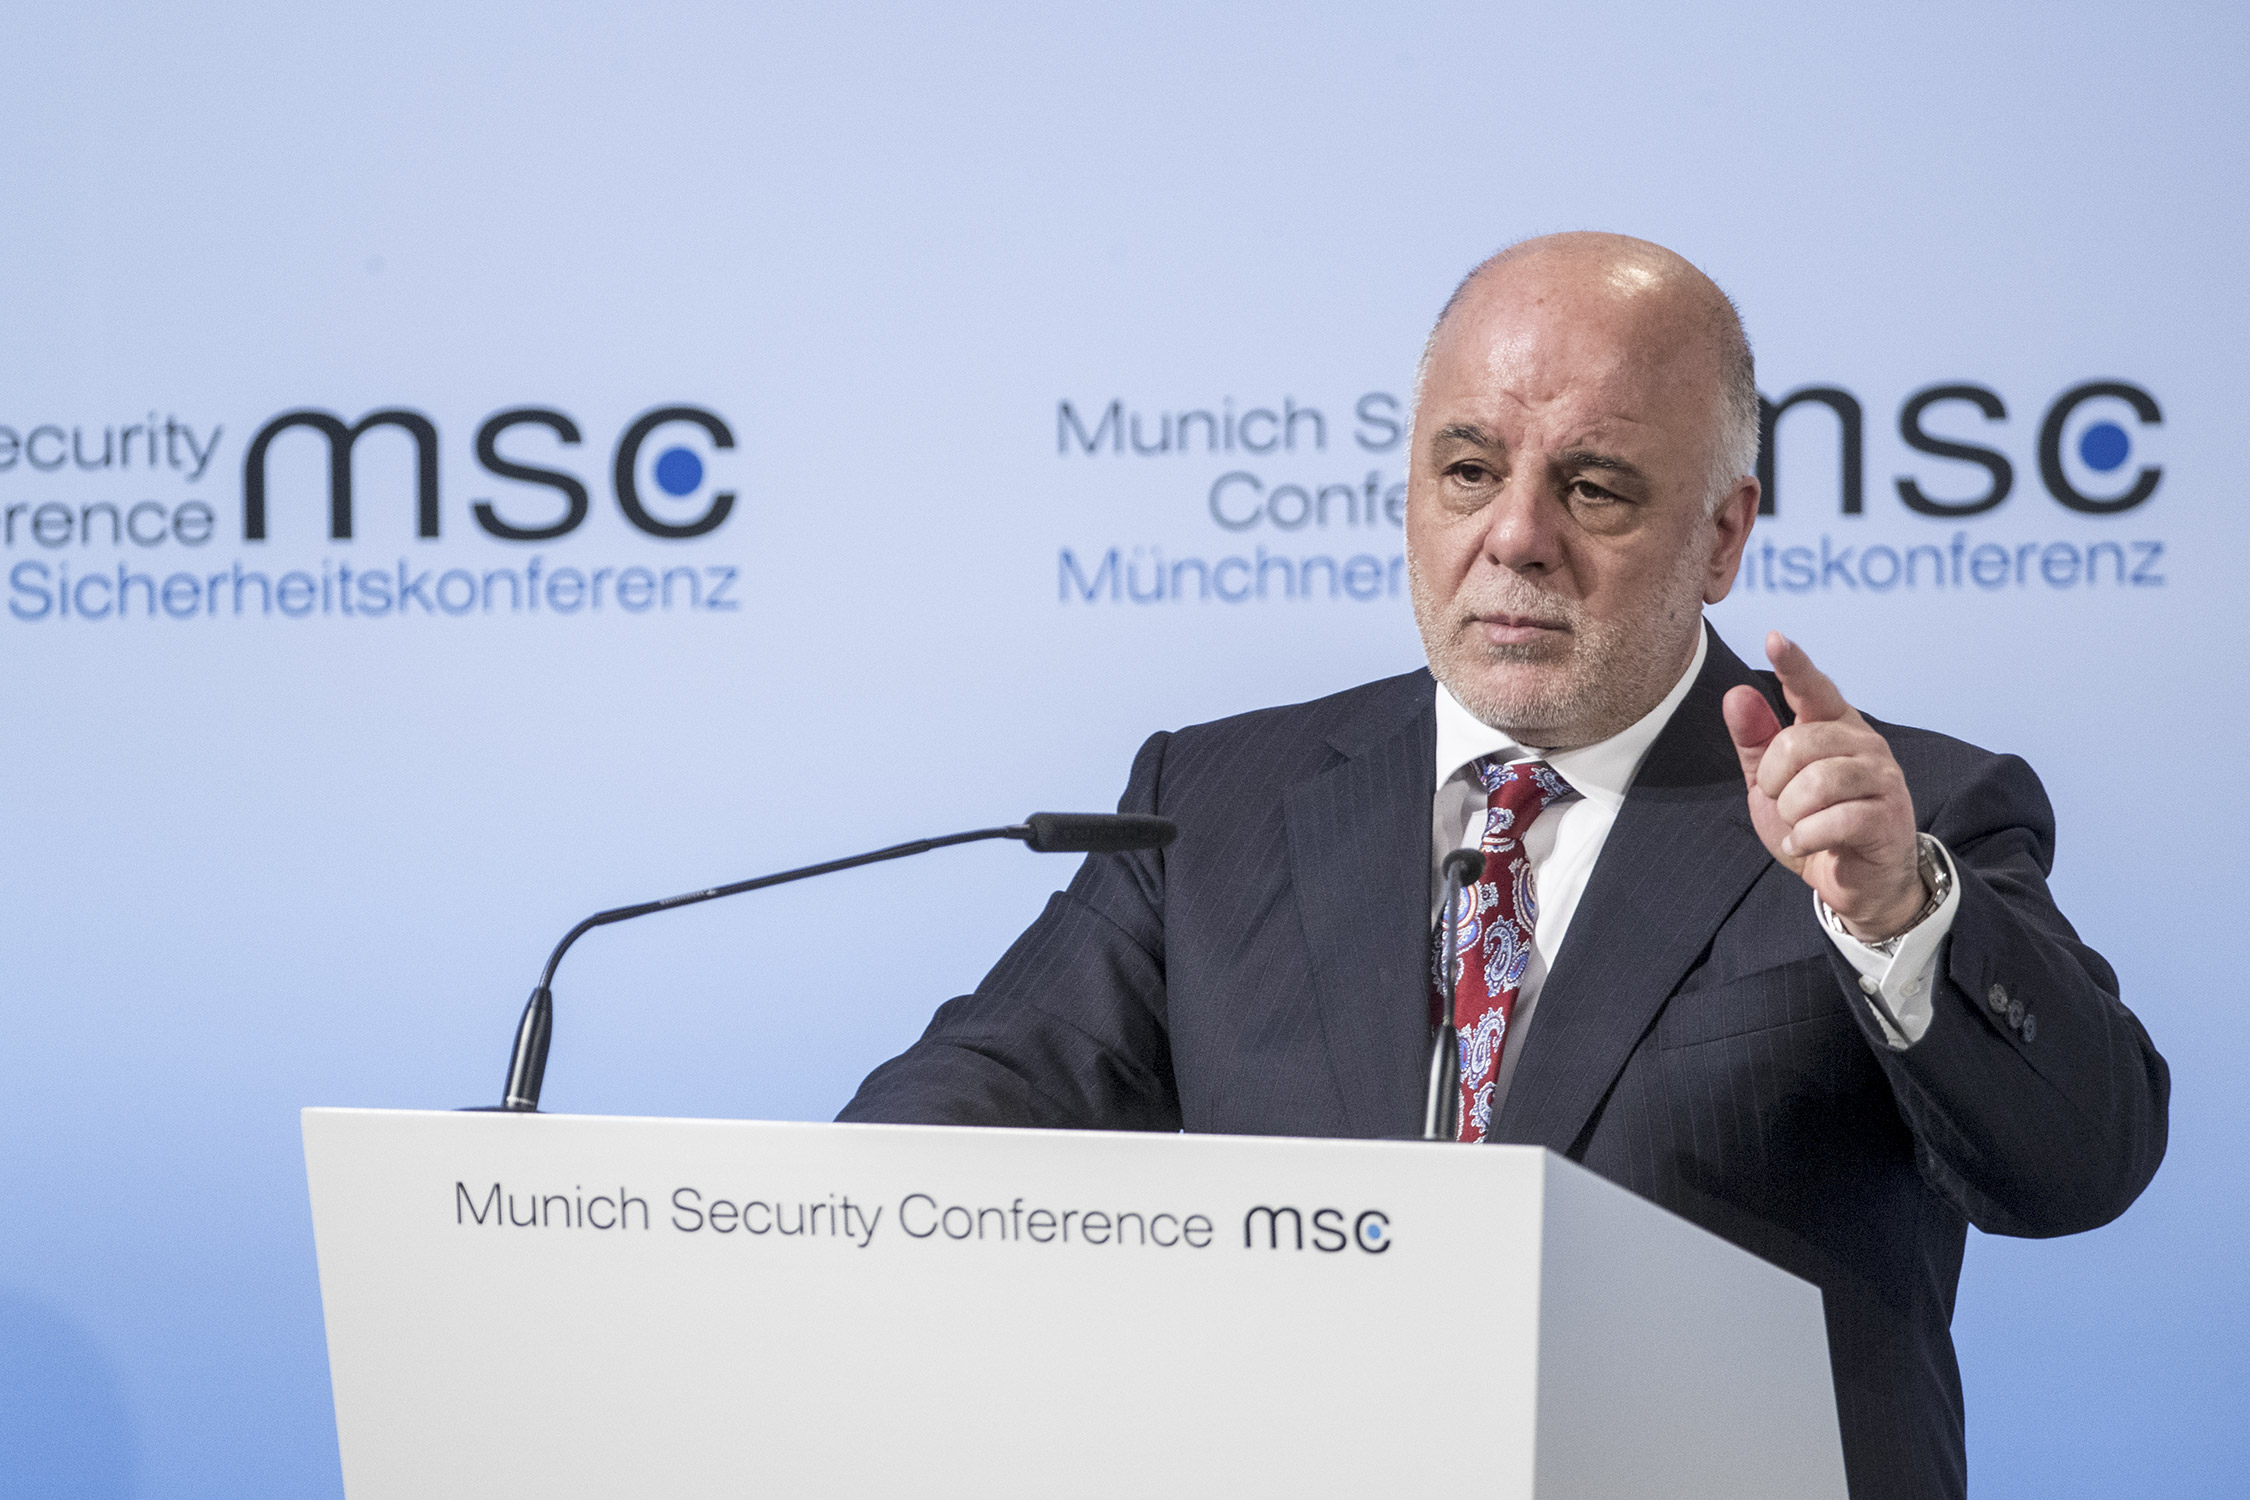 Haider al-Abadi, Prime Minister of Iraq, at the Munich Security Conference